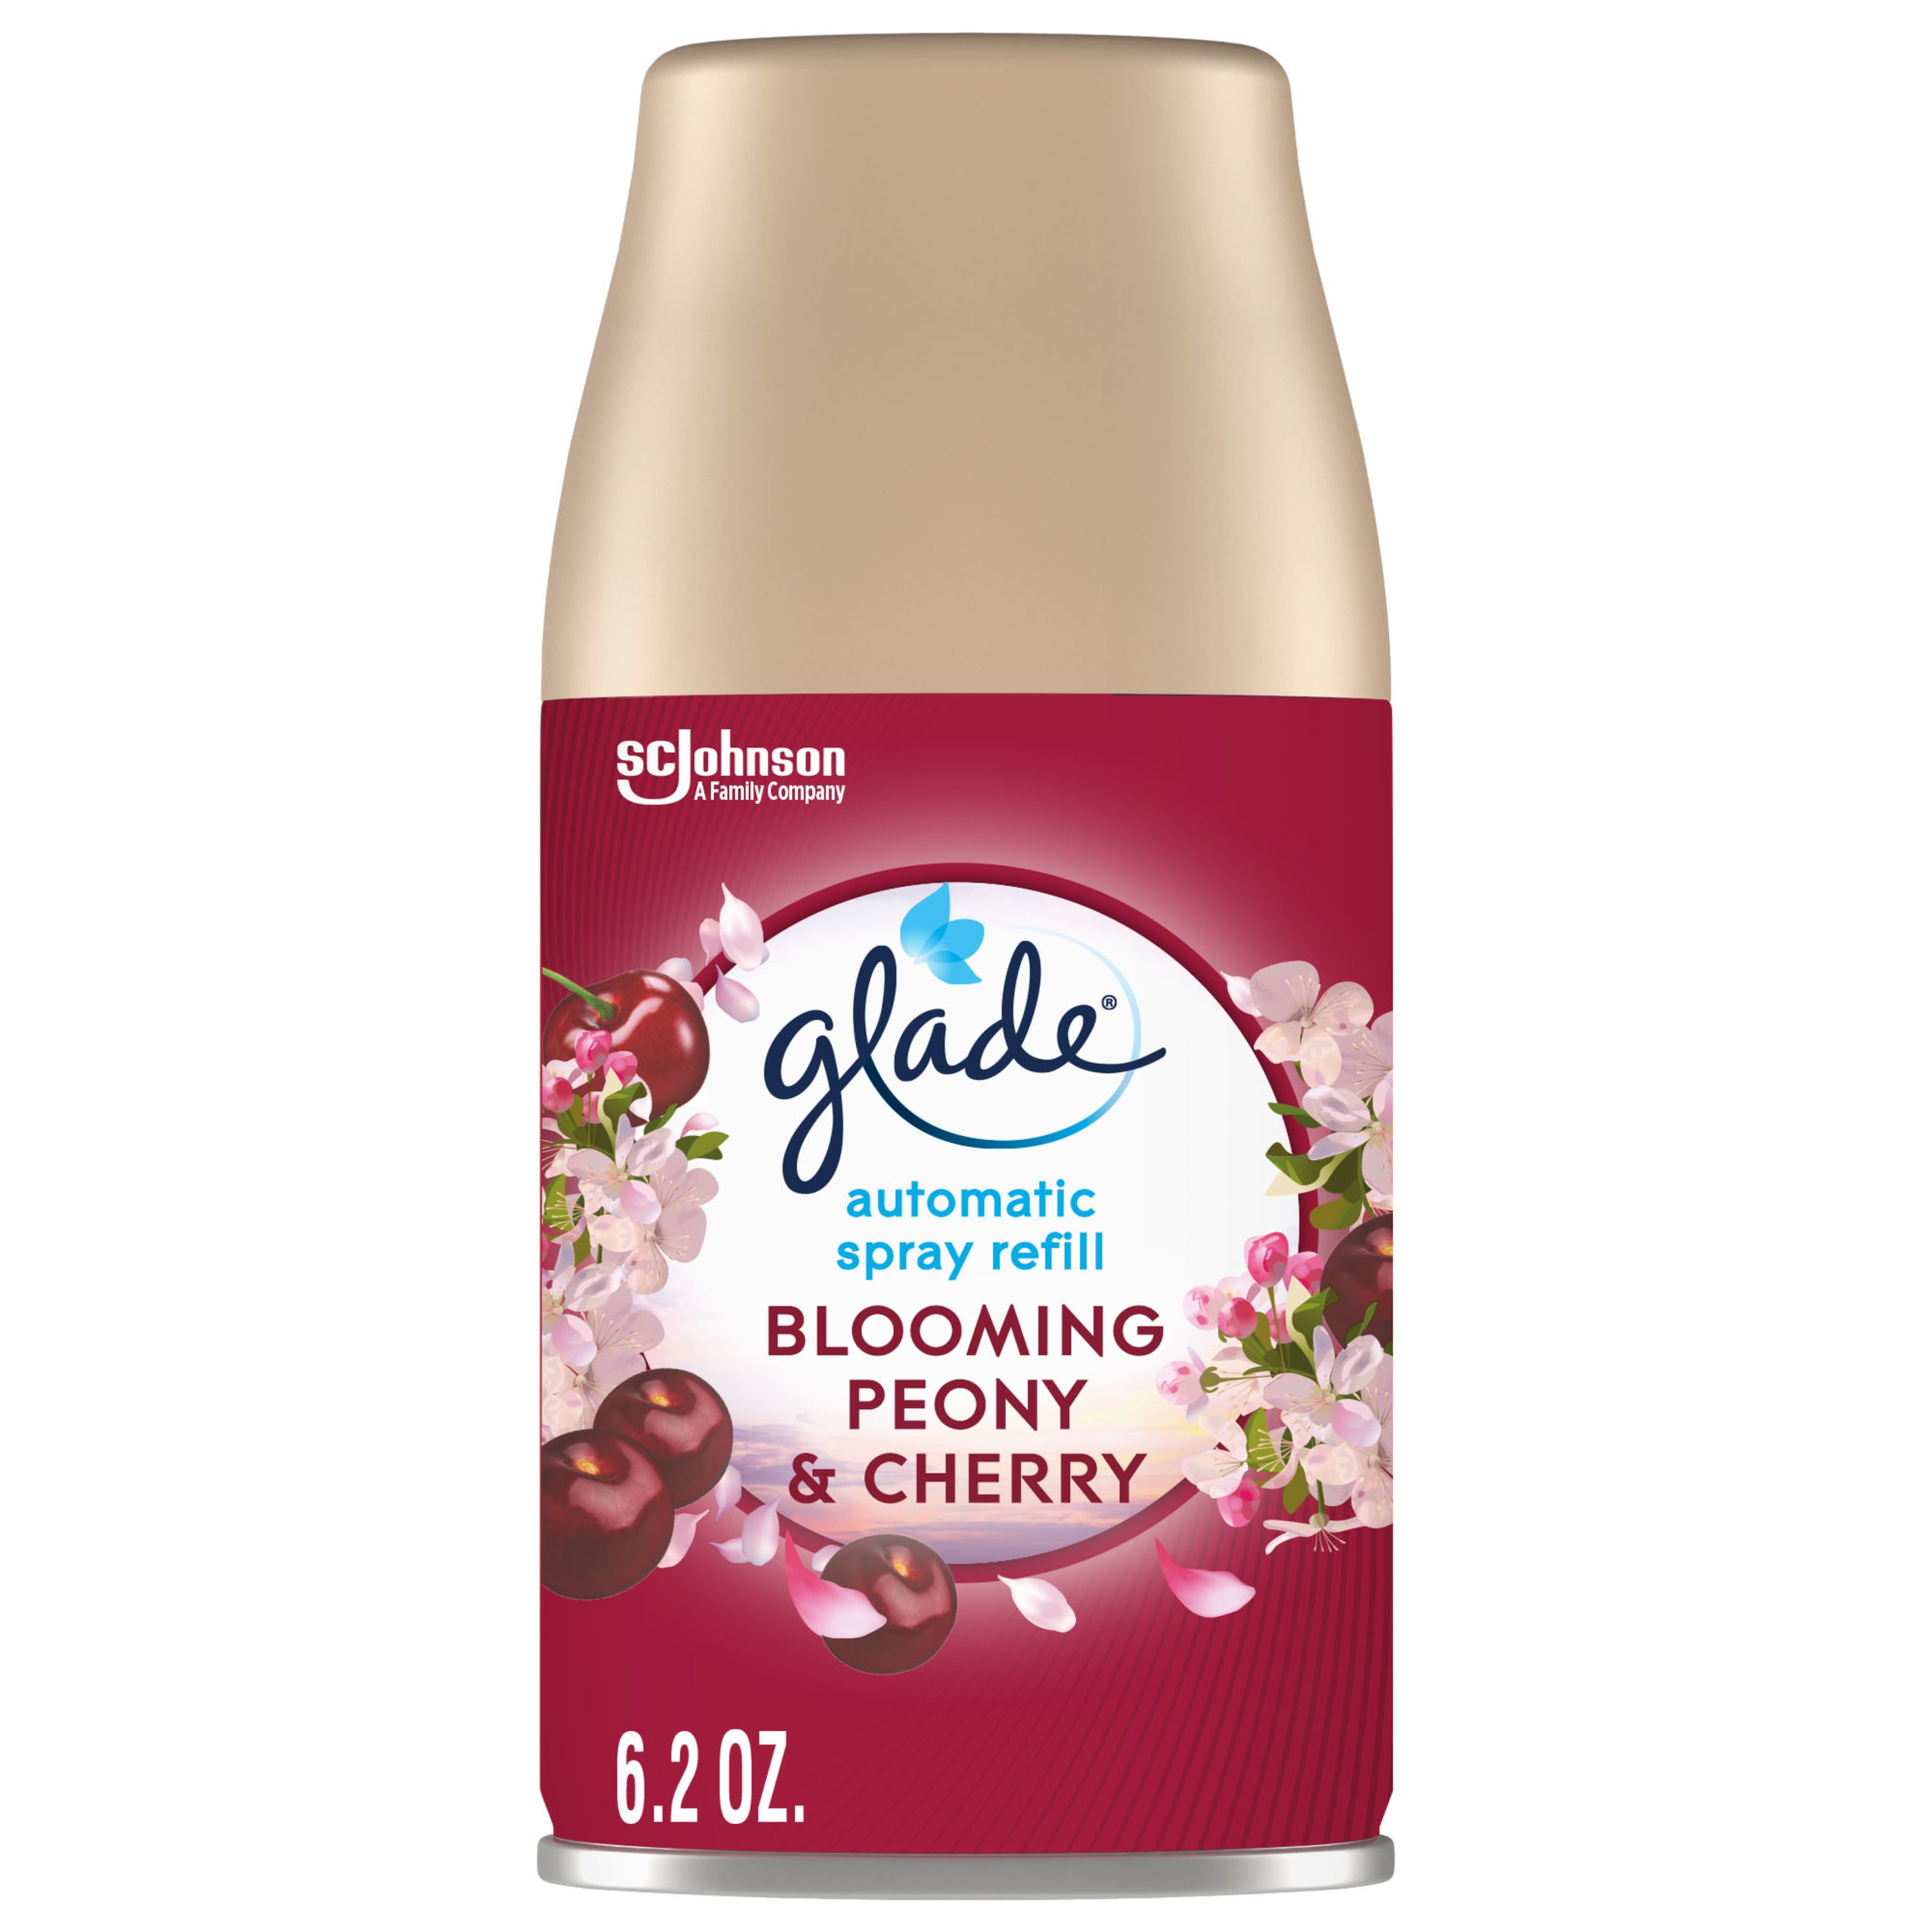 Glade Automatic Spray Refill 1 CT, Blooming Peony & Cherry, 6.2 OZ. Total,  Air Freshener Infused with Essential Oils